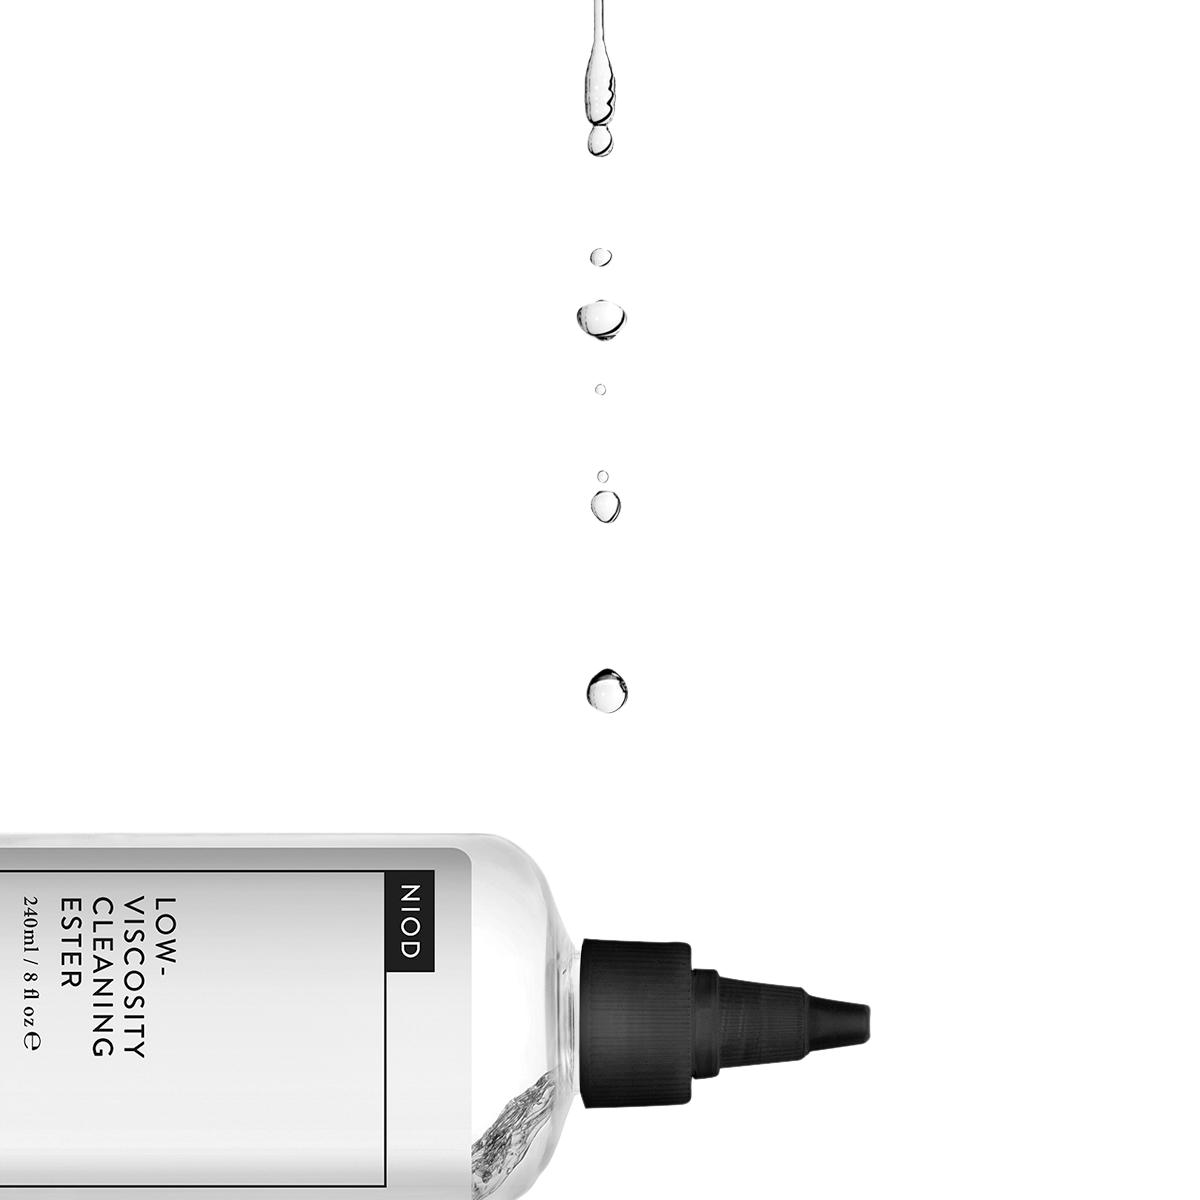 NIOD - Low-Viscosity Cleaning Ester Cleanser